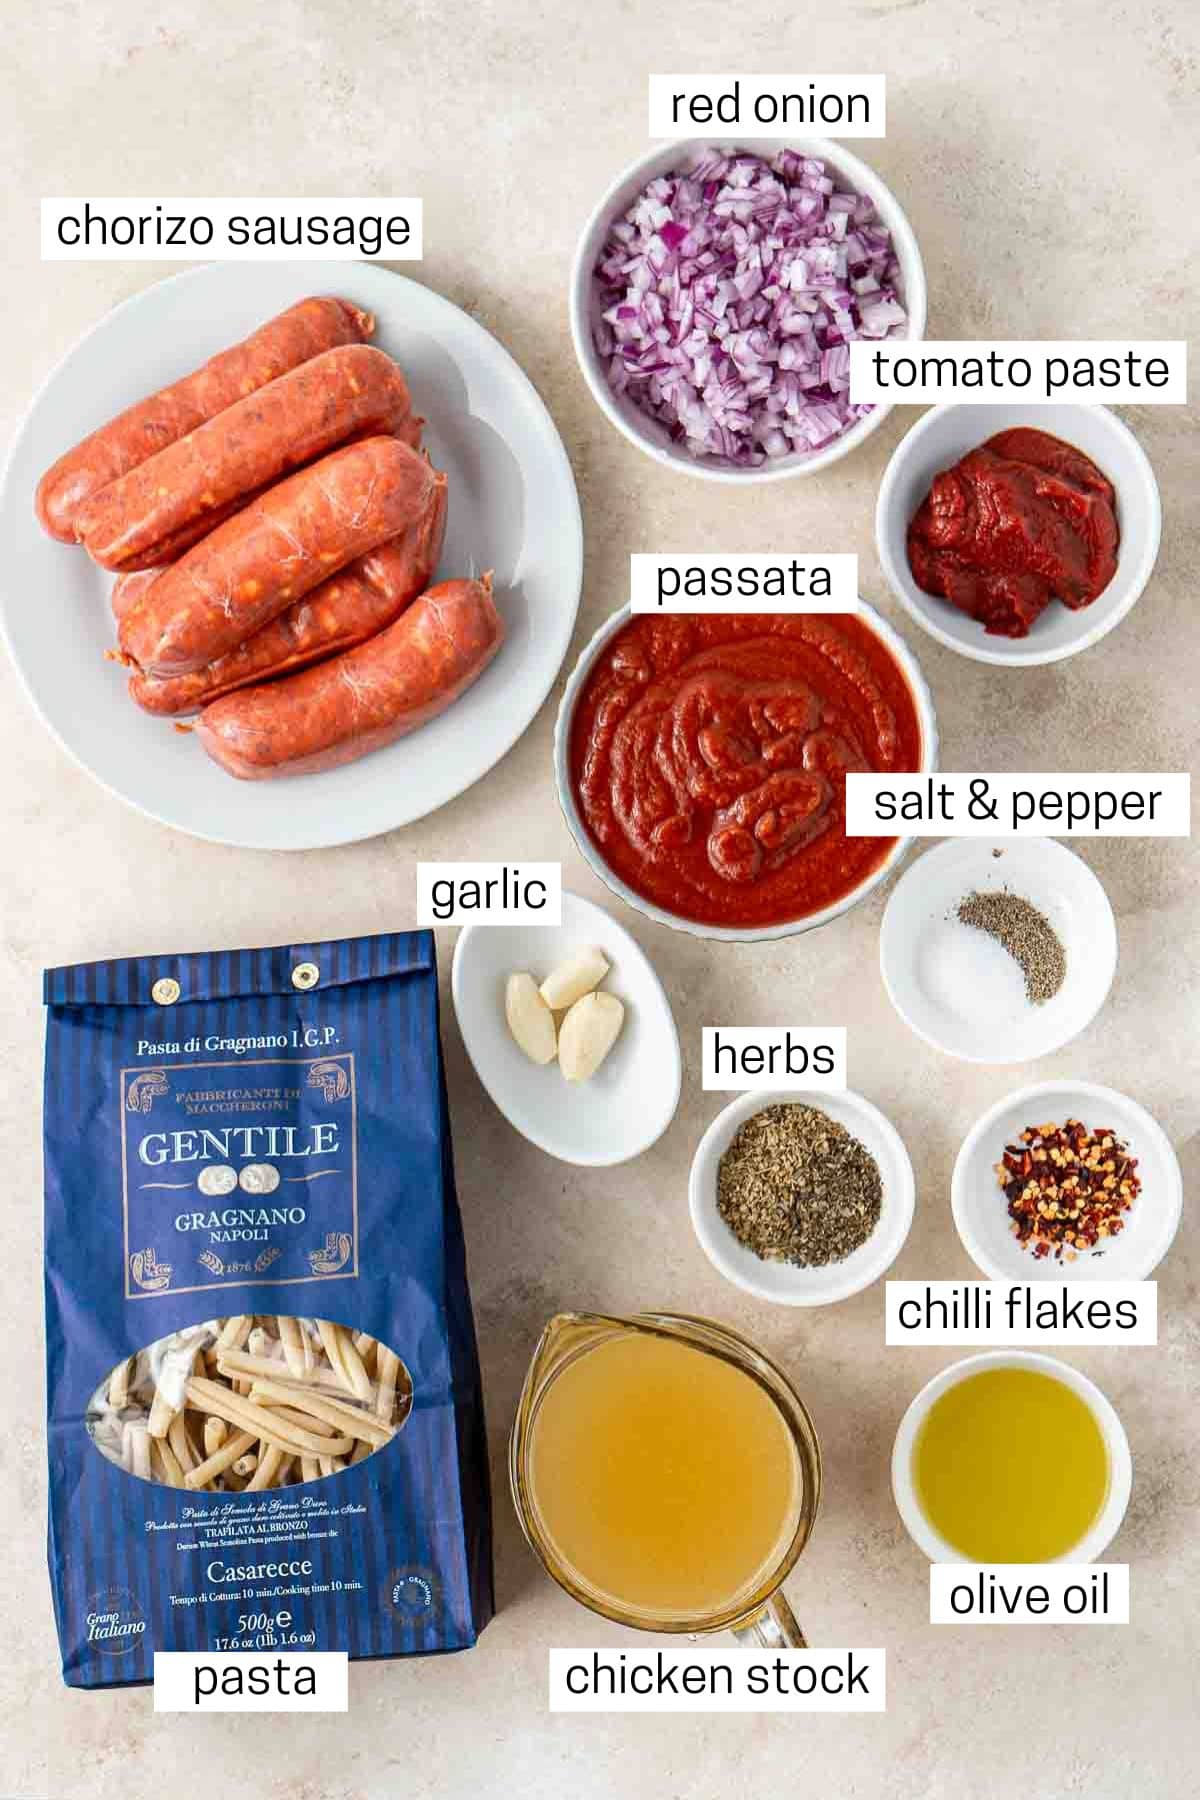 All ingredients needed to make spicy sausage pasta laid out in small bowls.